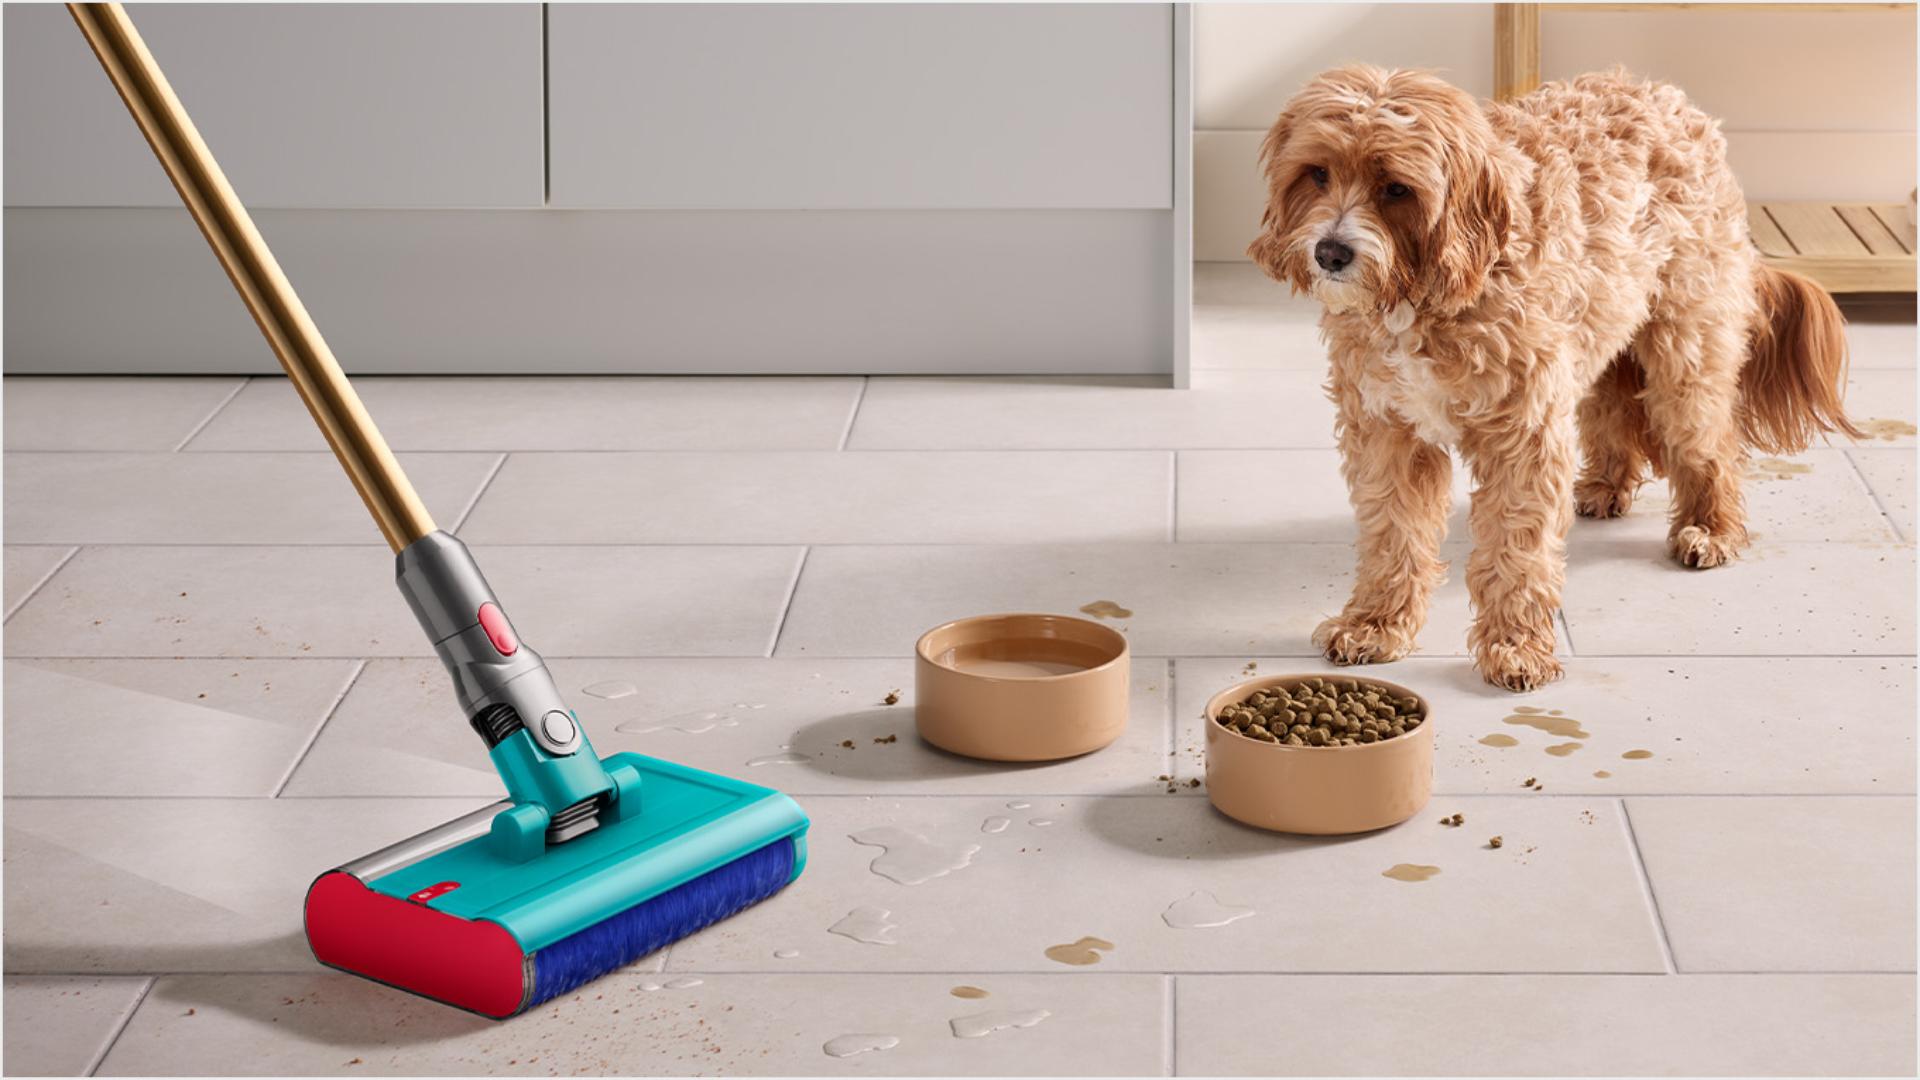 Dog stares past food and water bowl as Dyson Submarine wet roller head cleans.